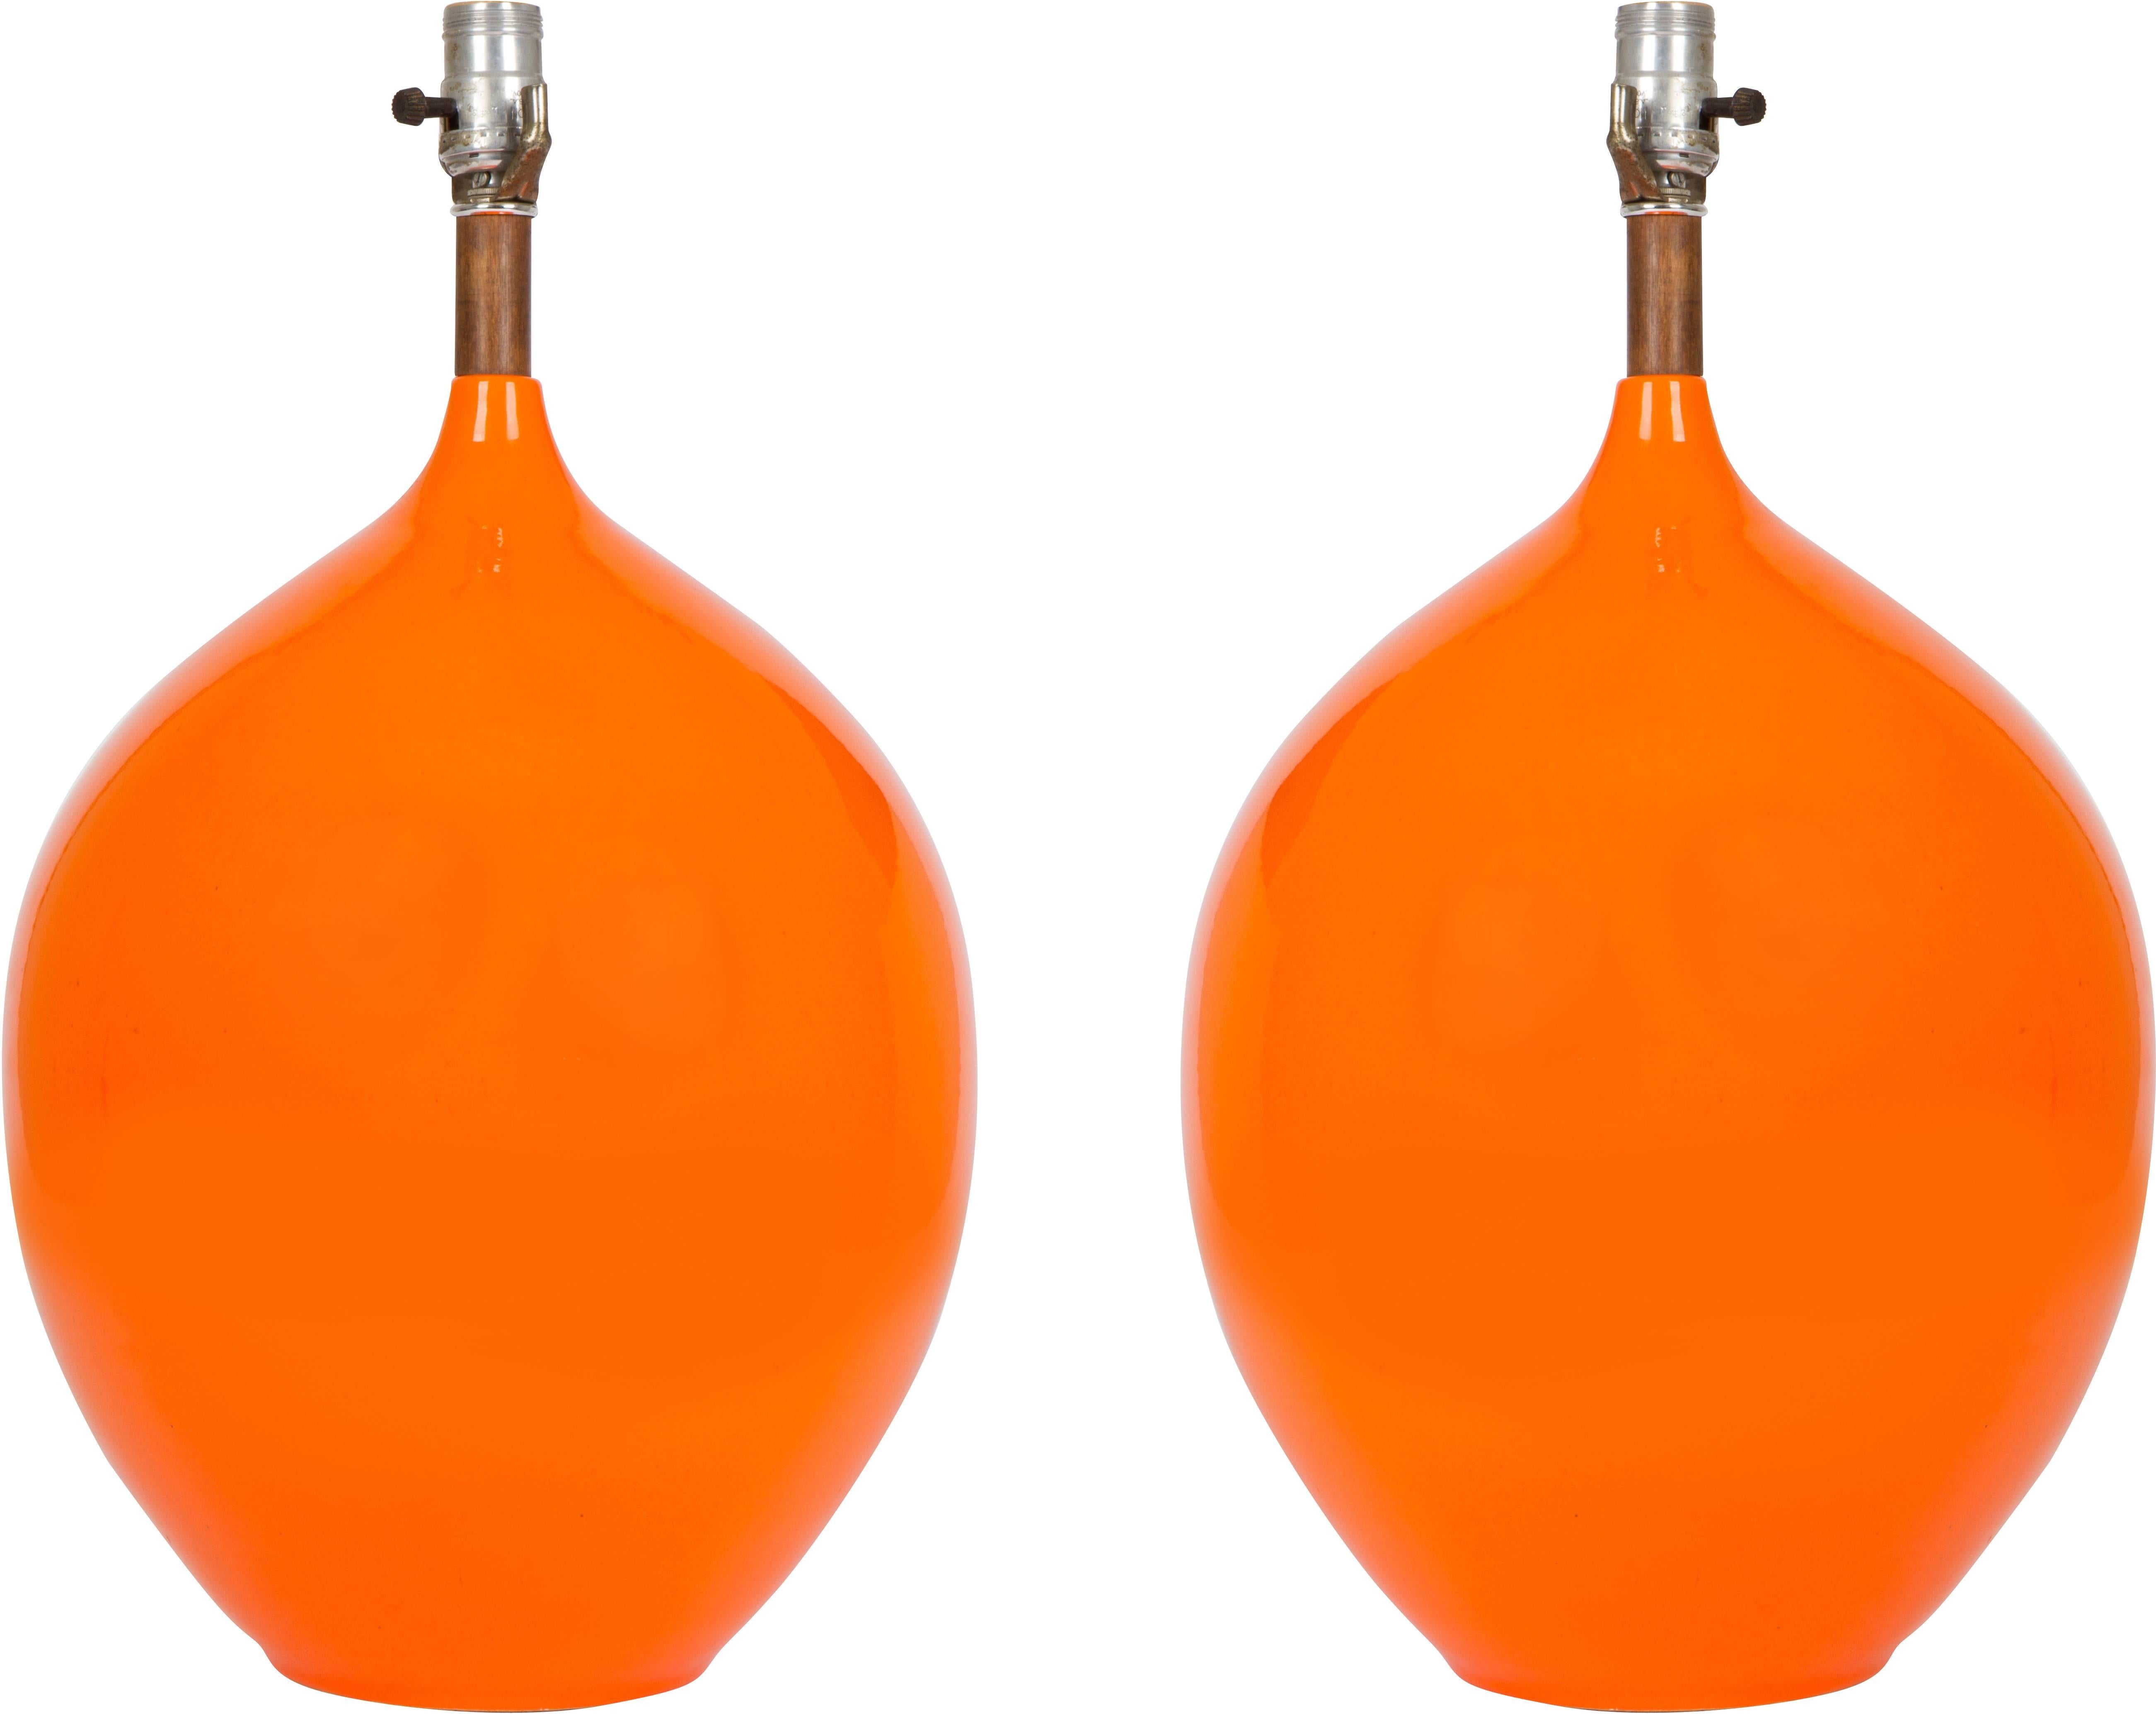 Very chic and impressive pair of lamps, orange glazed stoneware, walnut, parchment, 1960 attributed to Jacques and Dani Ruelland, France, circa 1960.
Lampshades are not included.